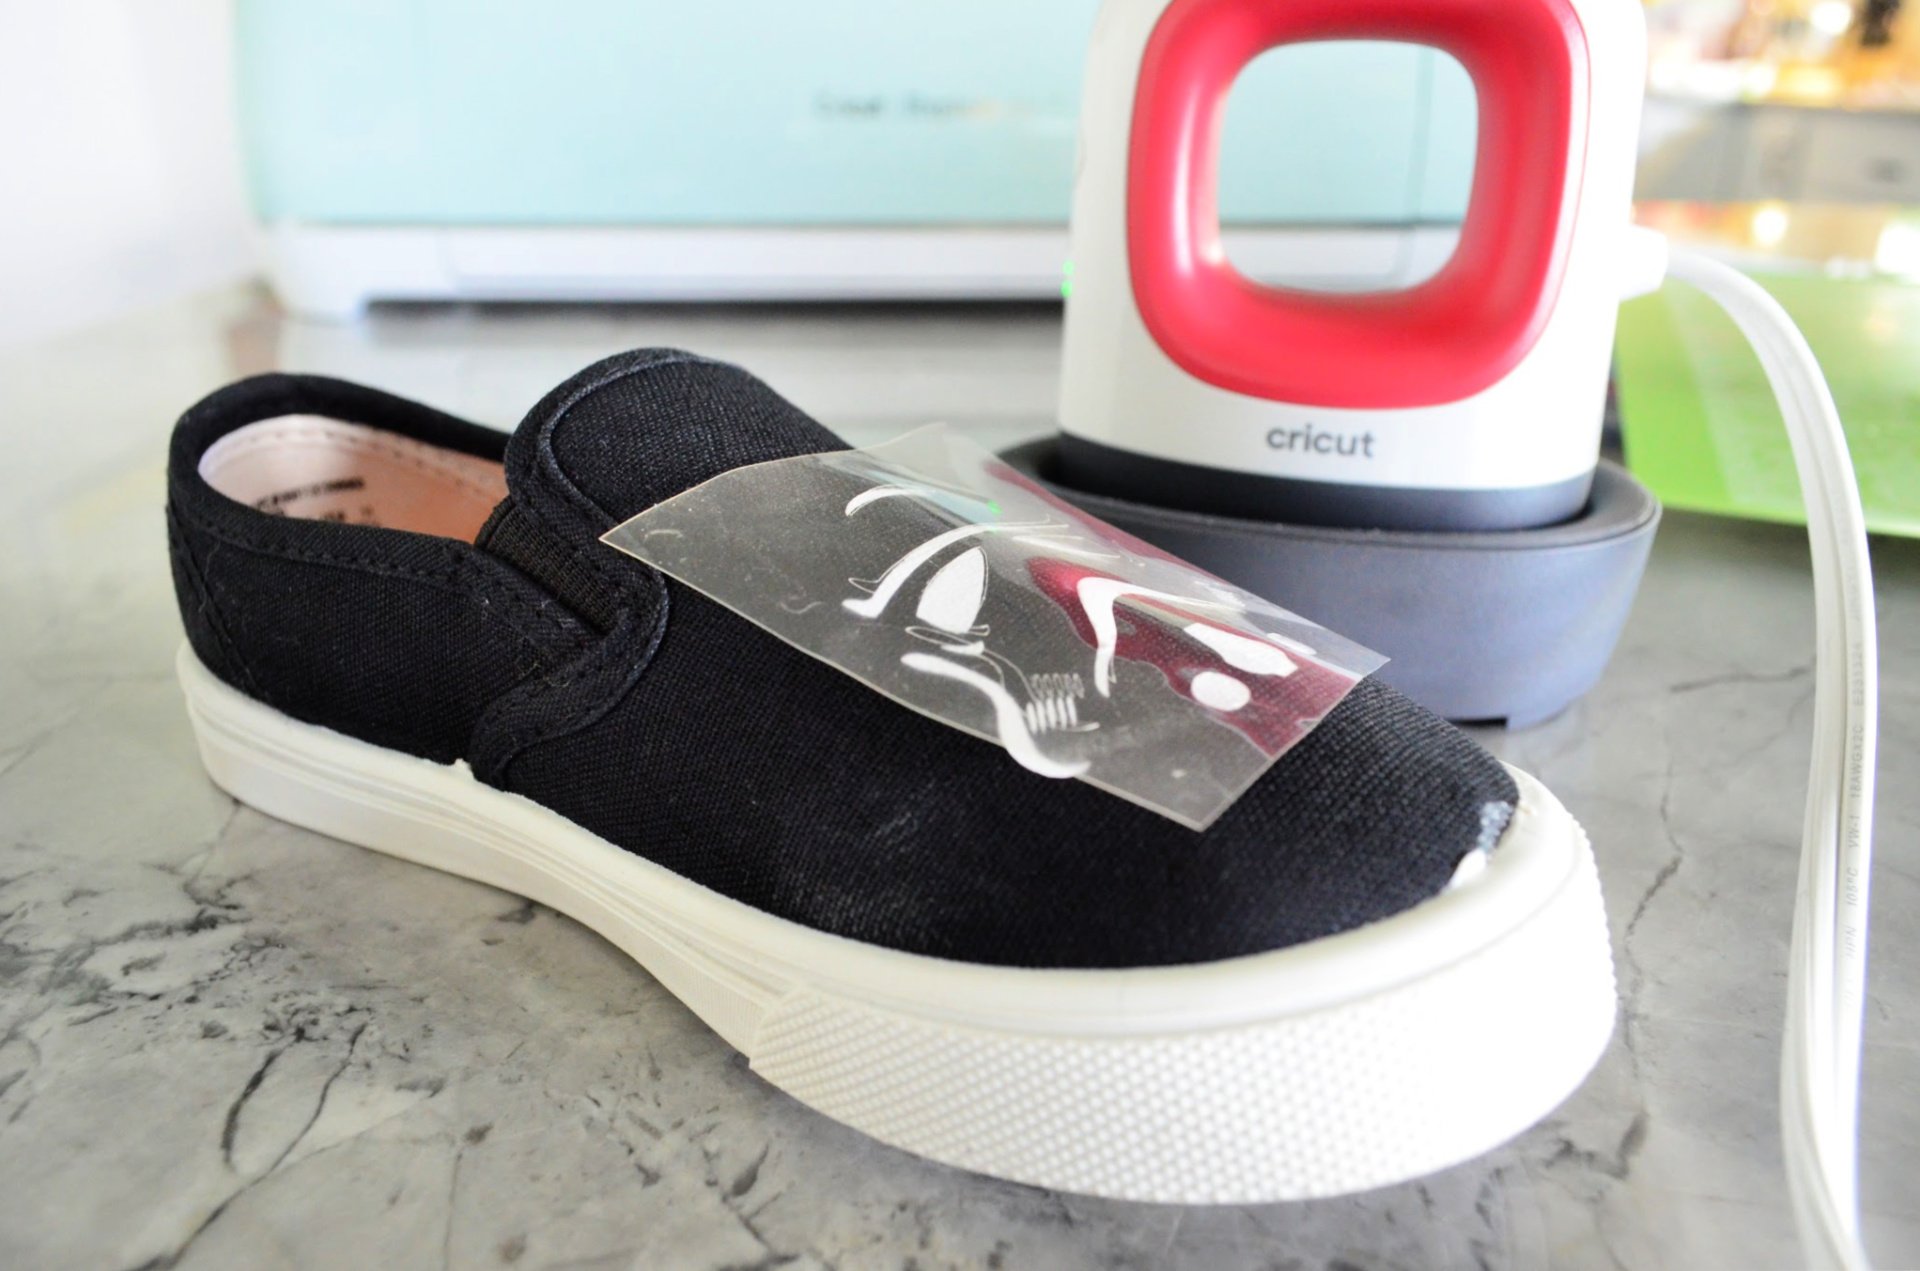 DIY Stormtrooper Shoes with Cricut Iron On Vinyl